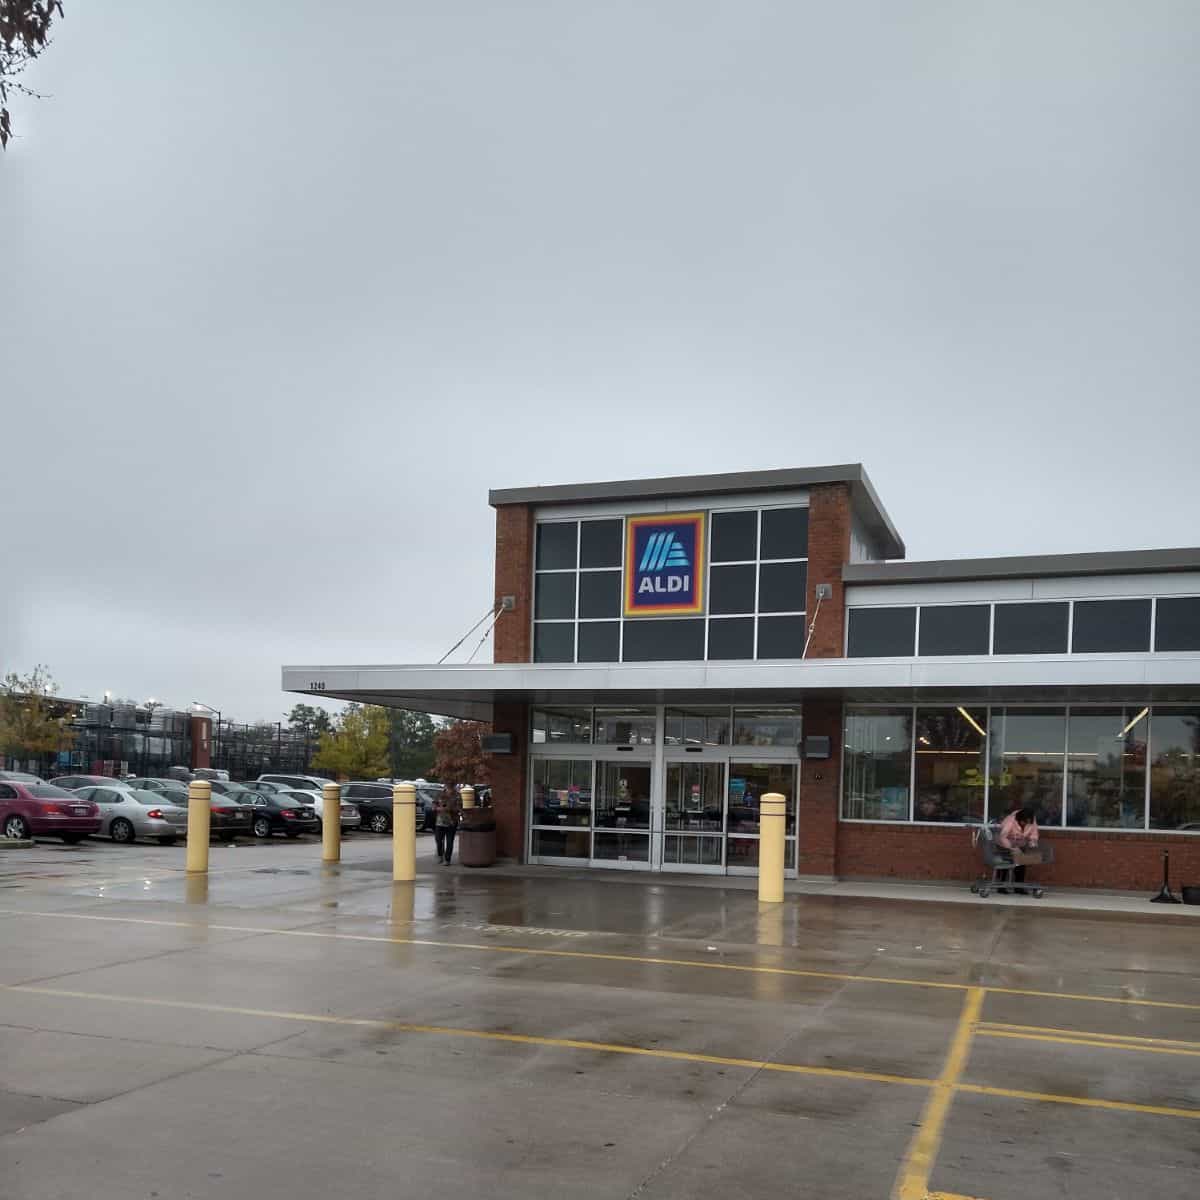 The store front of an ALDI store.